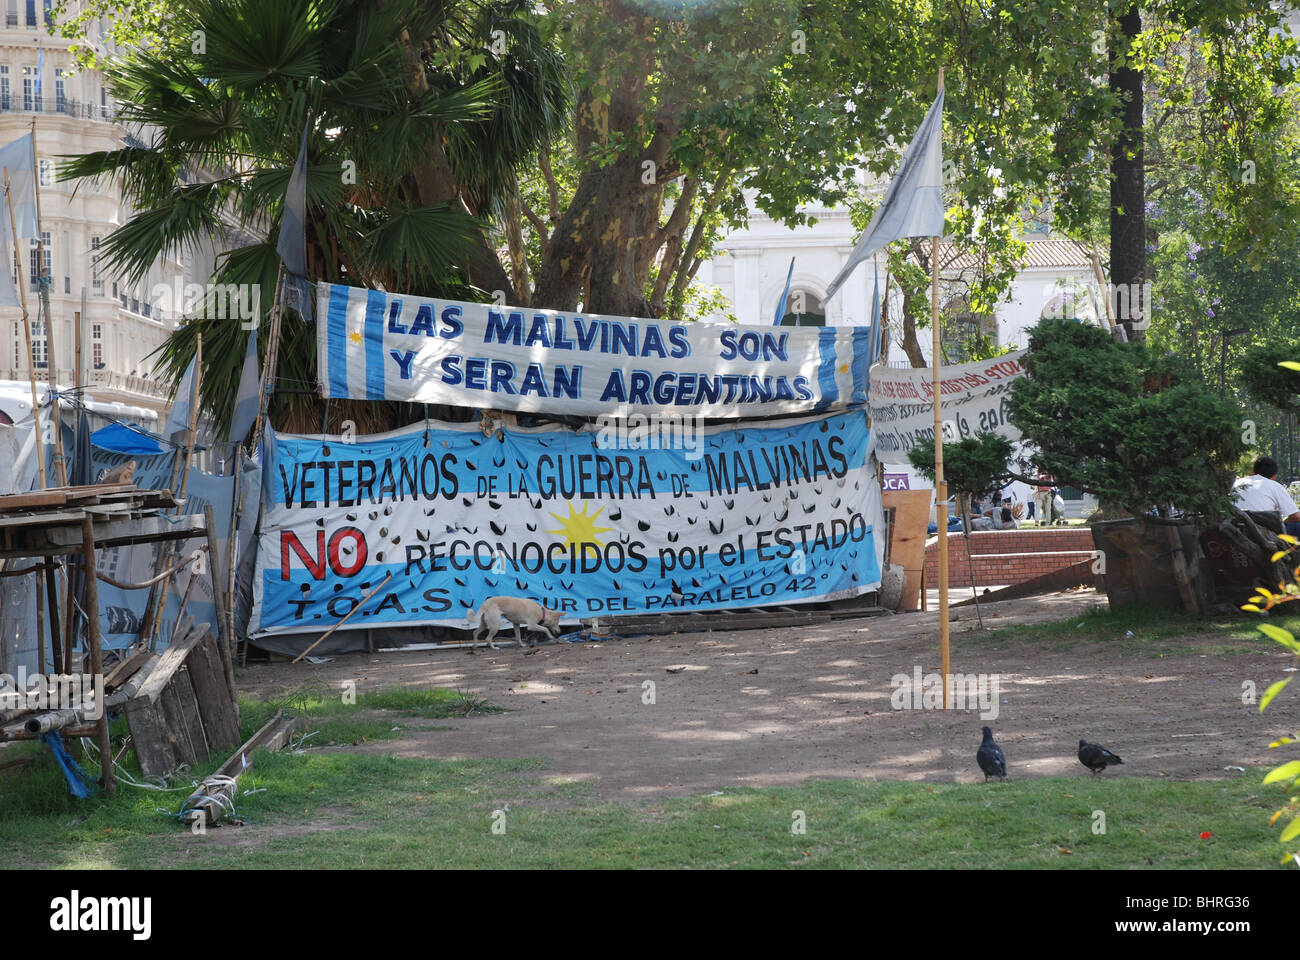 Demonstration in Buenos Aires; remembering the veterans of the Falklands war of 1982 Stock Photo